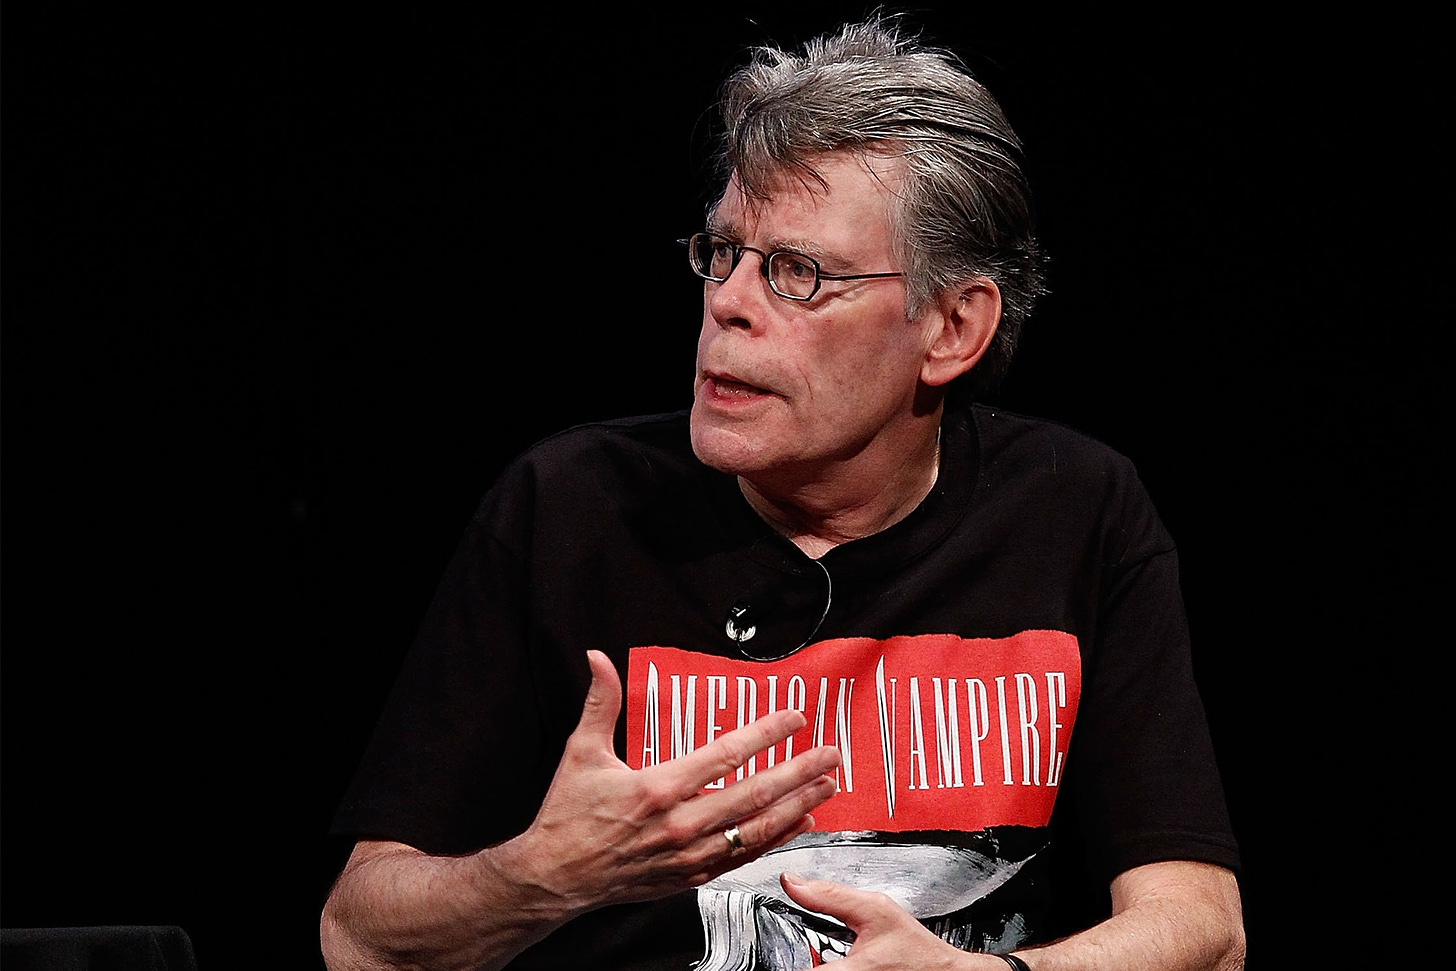 Stephen King Is Turning His Home Into A Writer's Residence And Archive - GQ